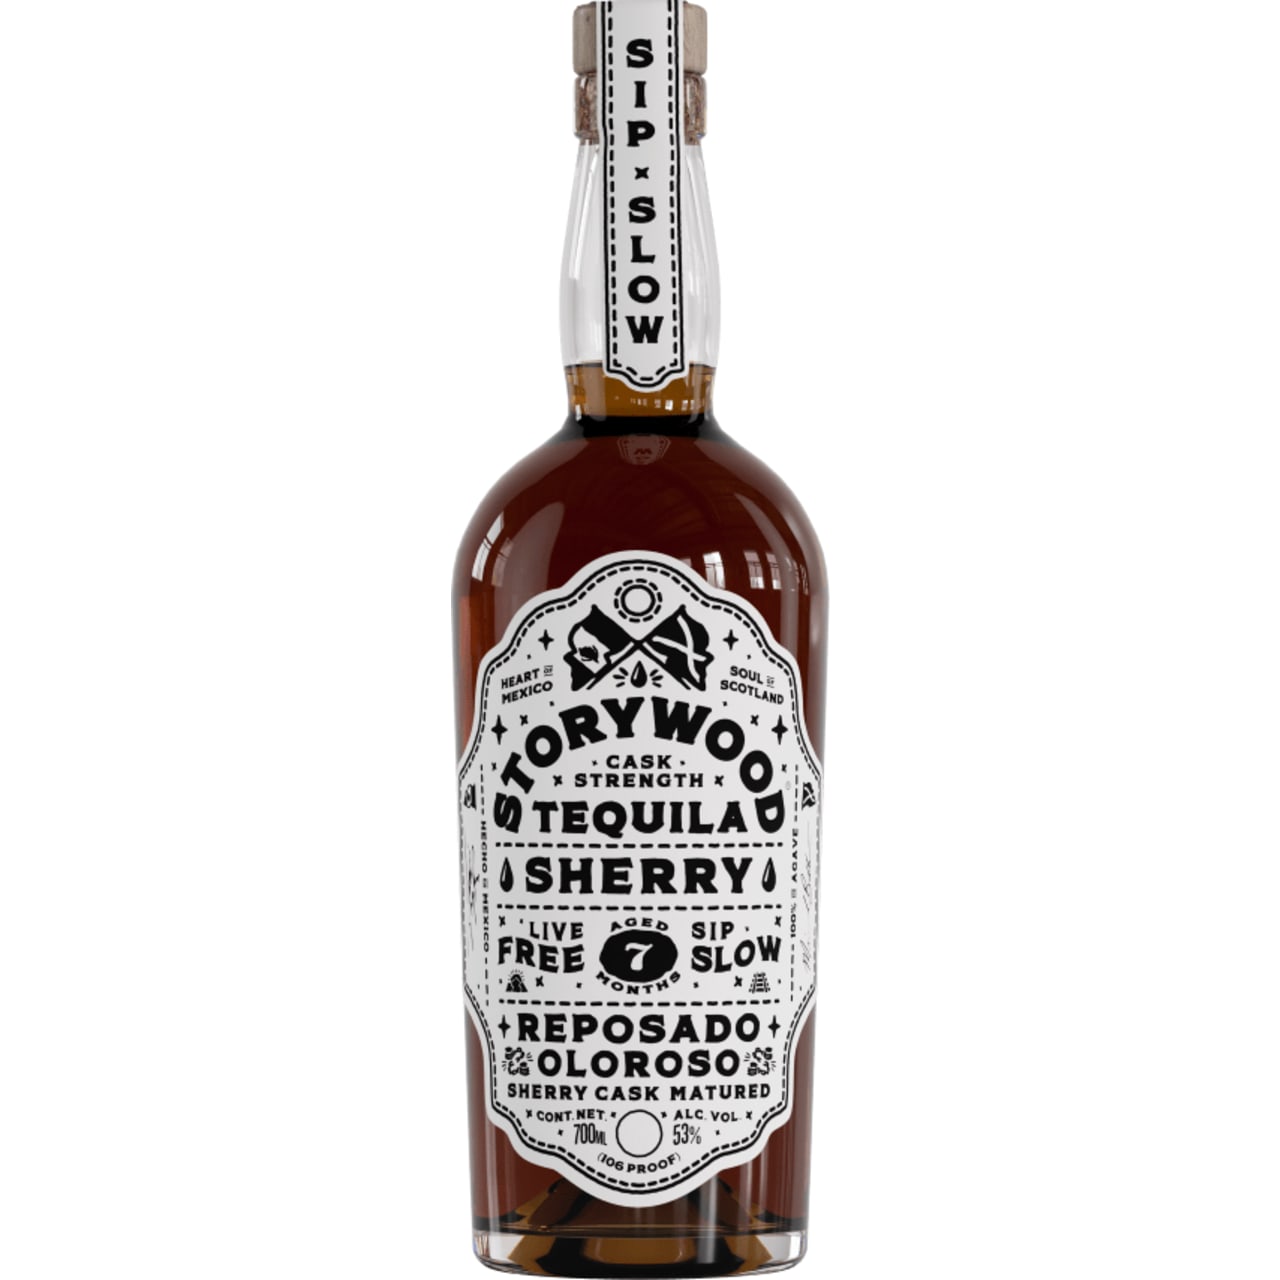 Product Image - Storywood Sherry 7 Cask Strength Tequila